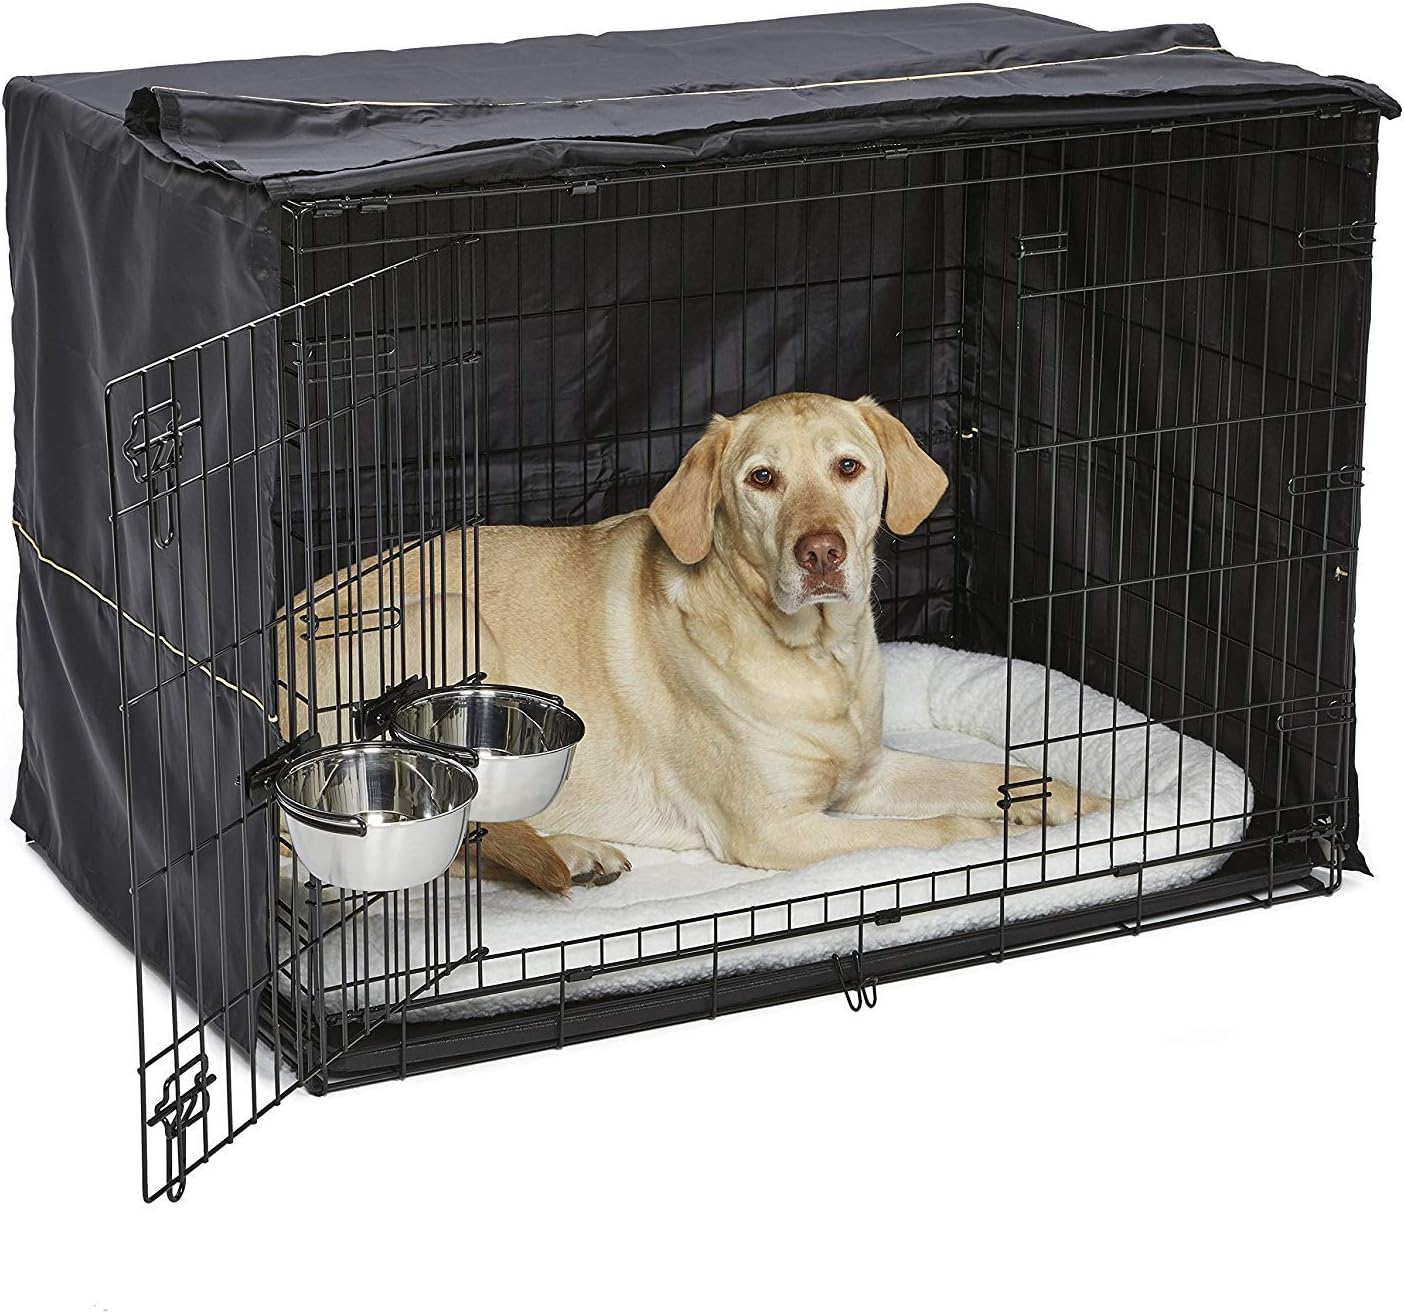 MidWest Homes for Pets iCrate Dog Crate Starter Kit 42-Inch - $85